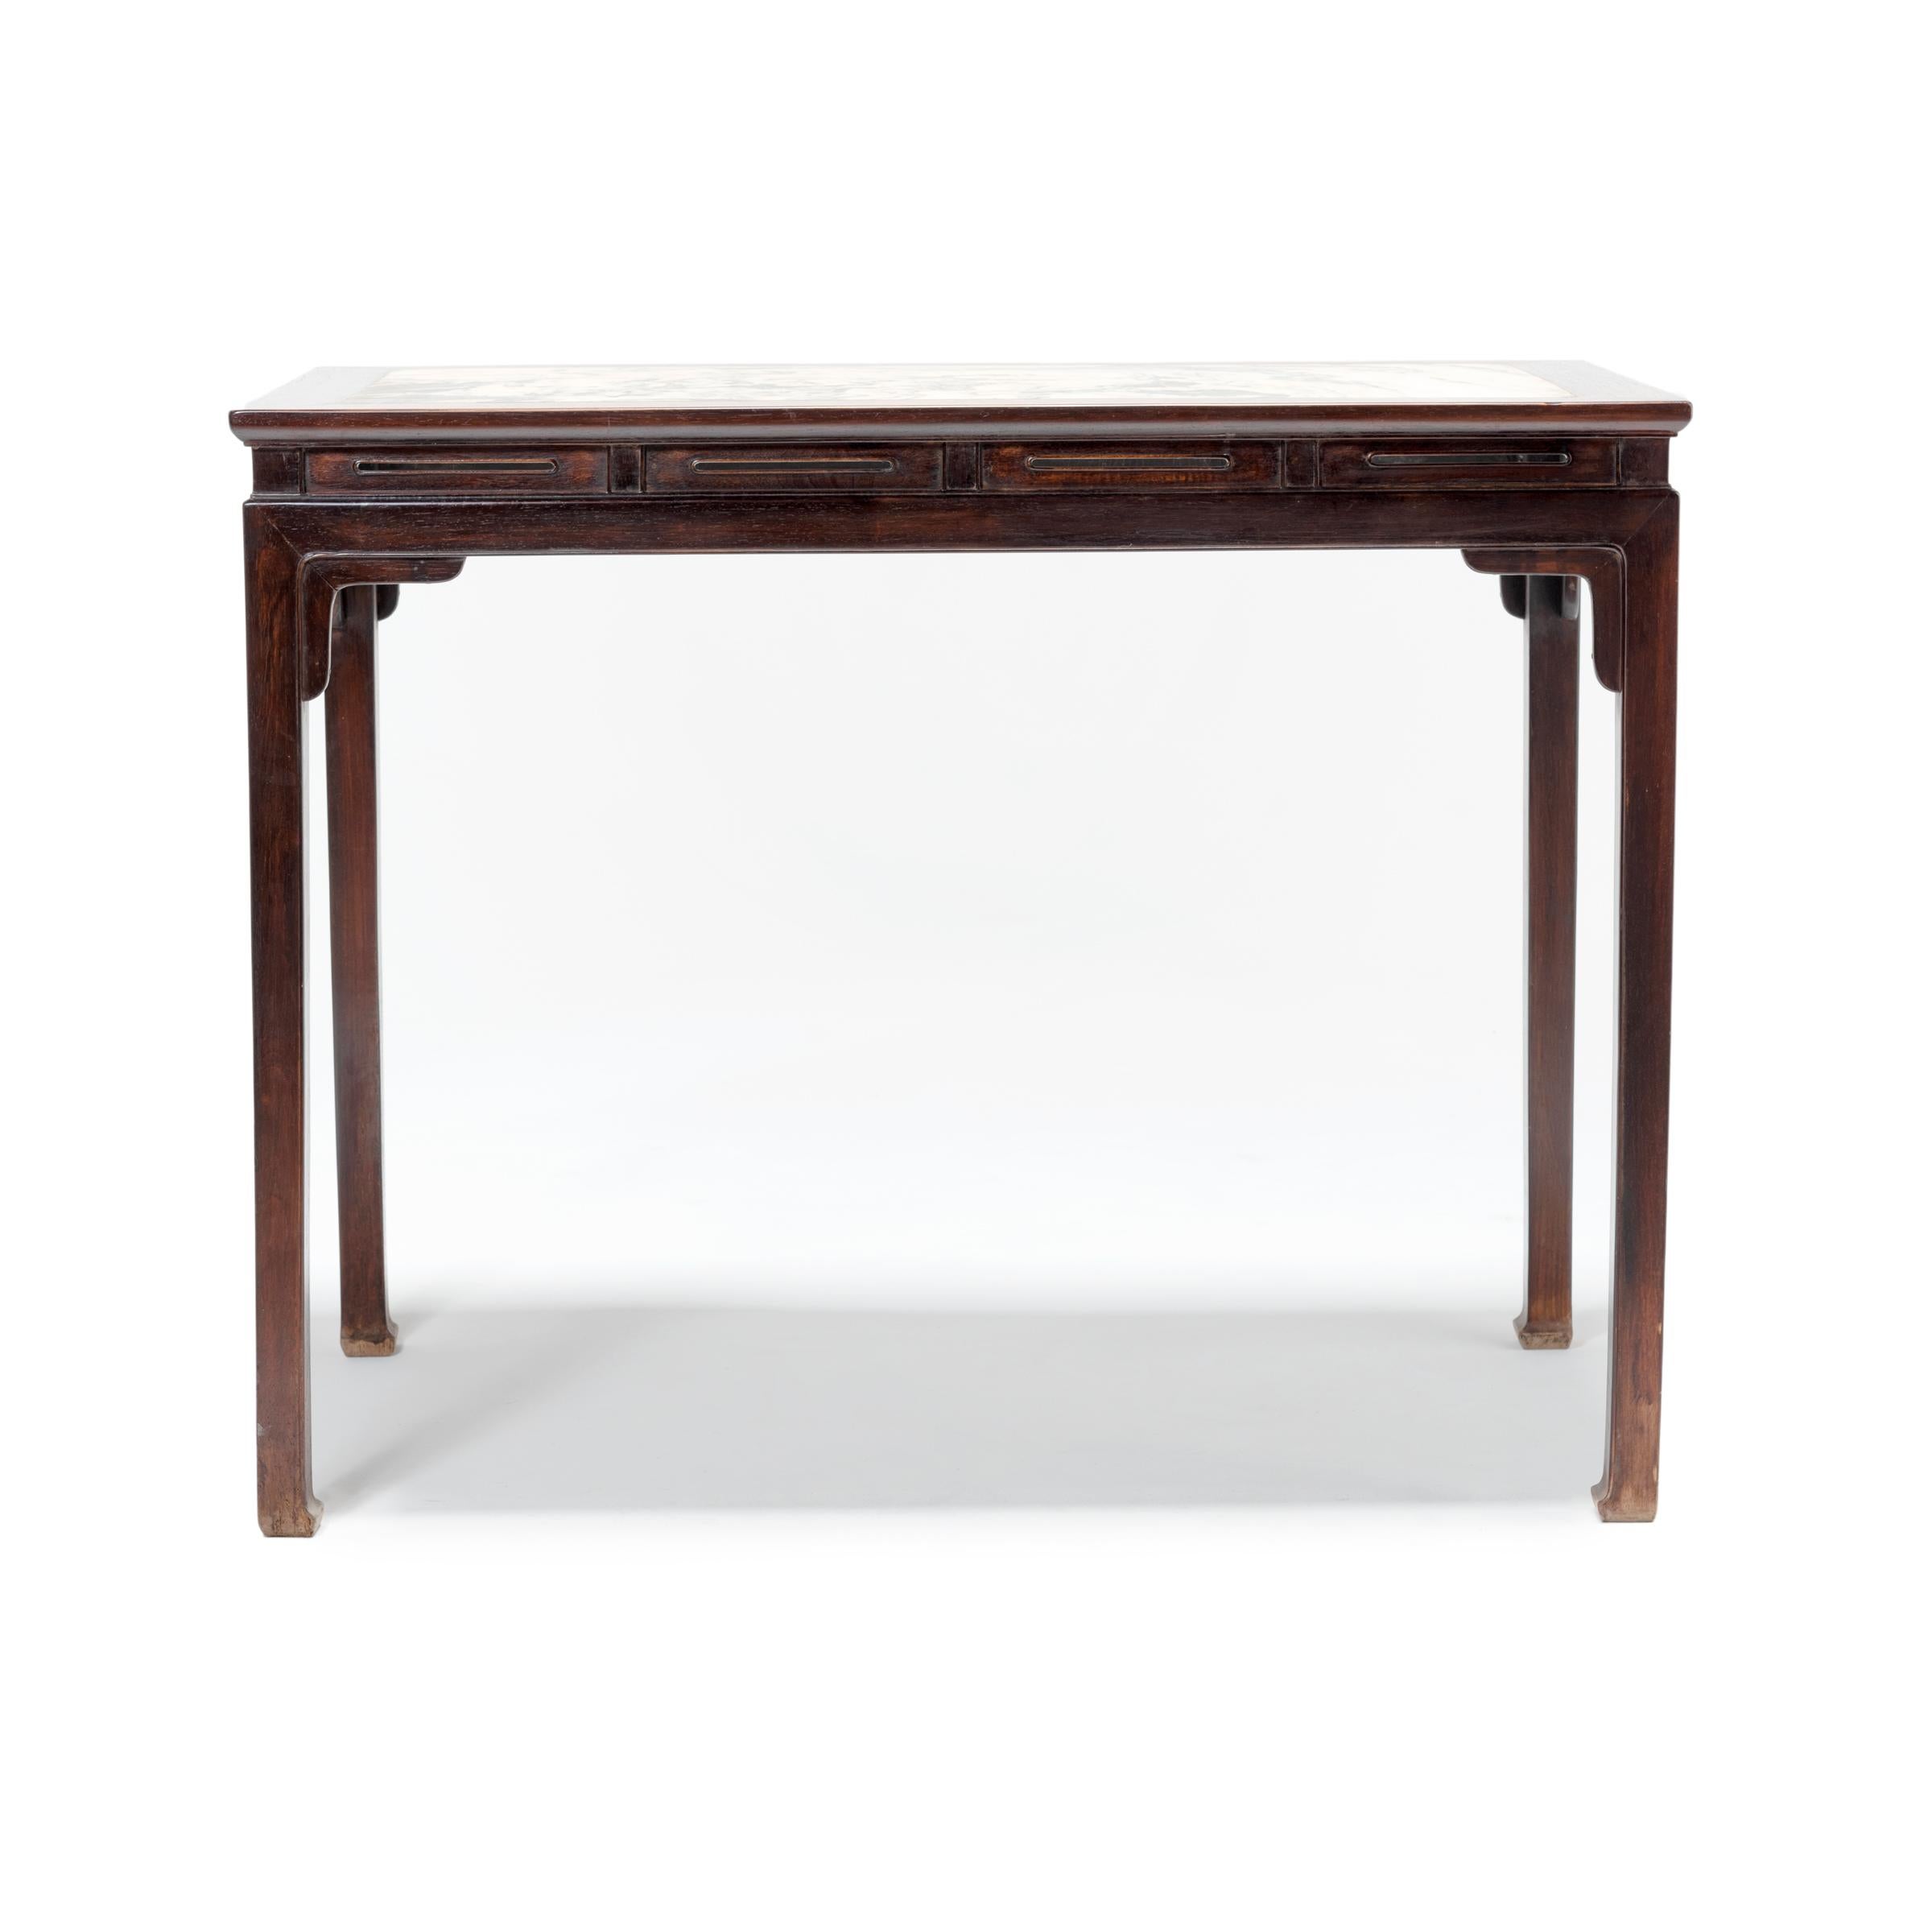 20th Century Chinese Marble Top Writing Table